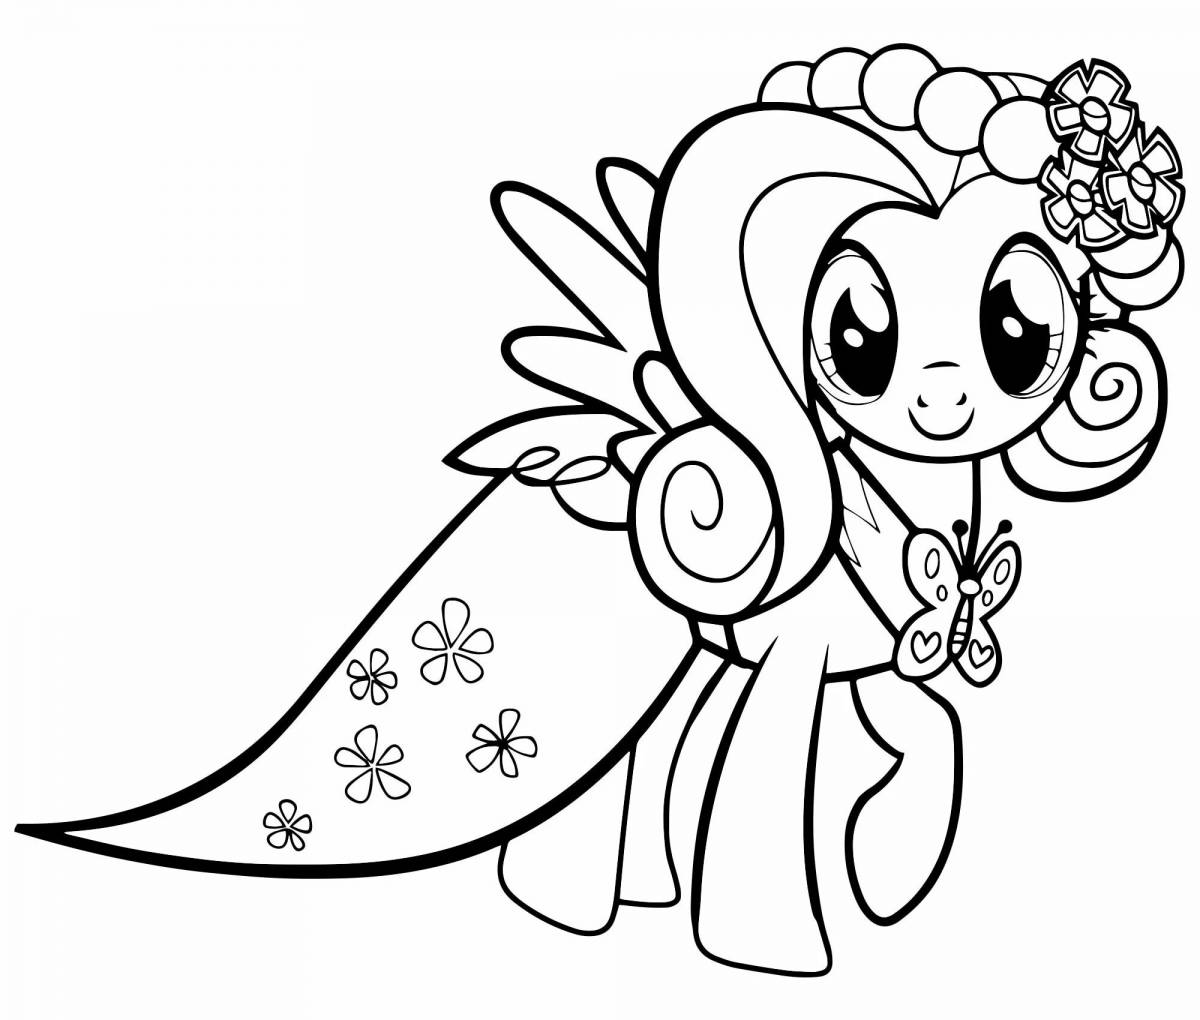 Perfect pony coloring